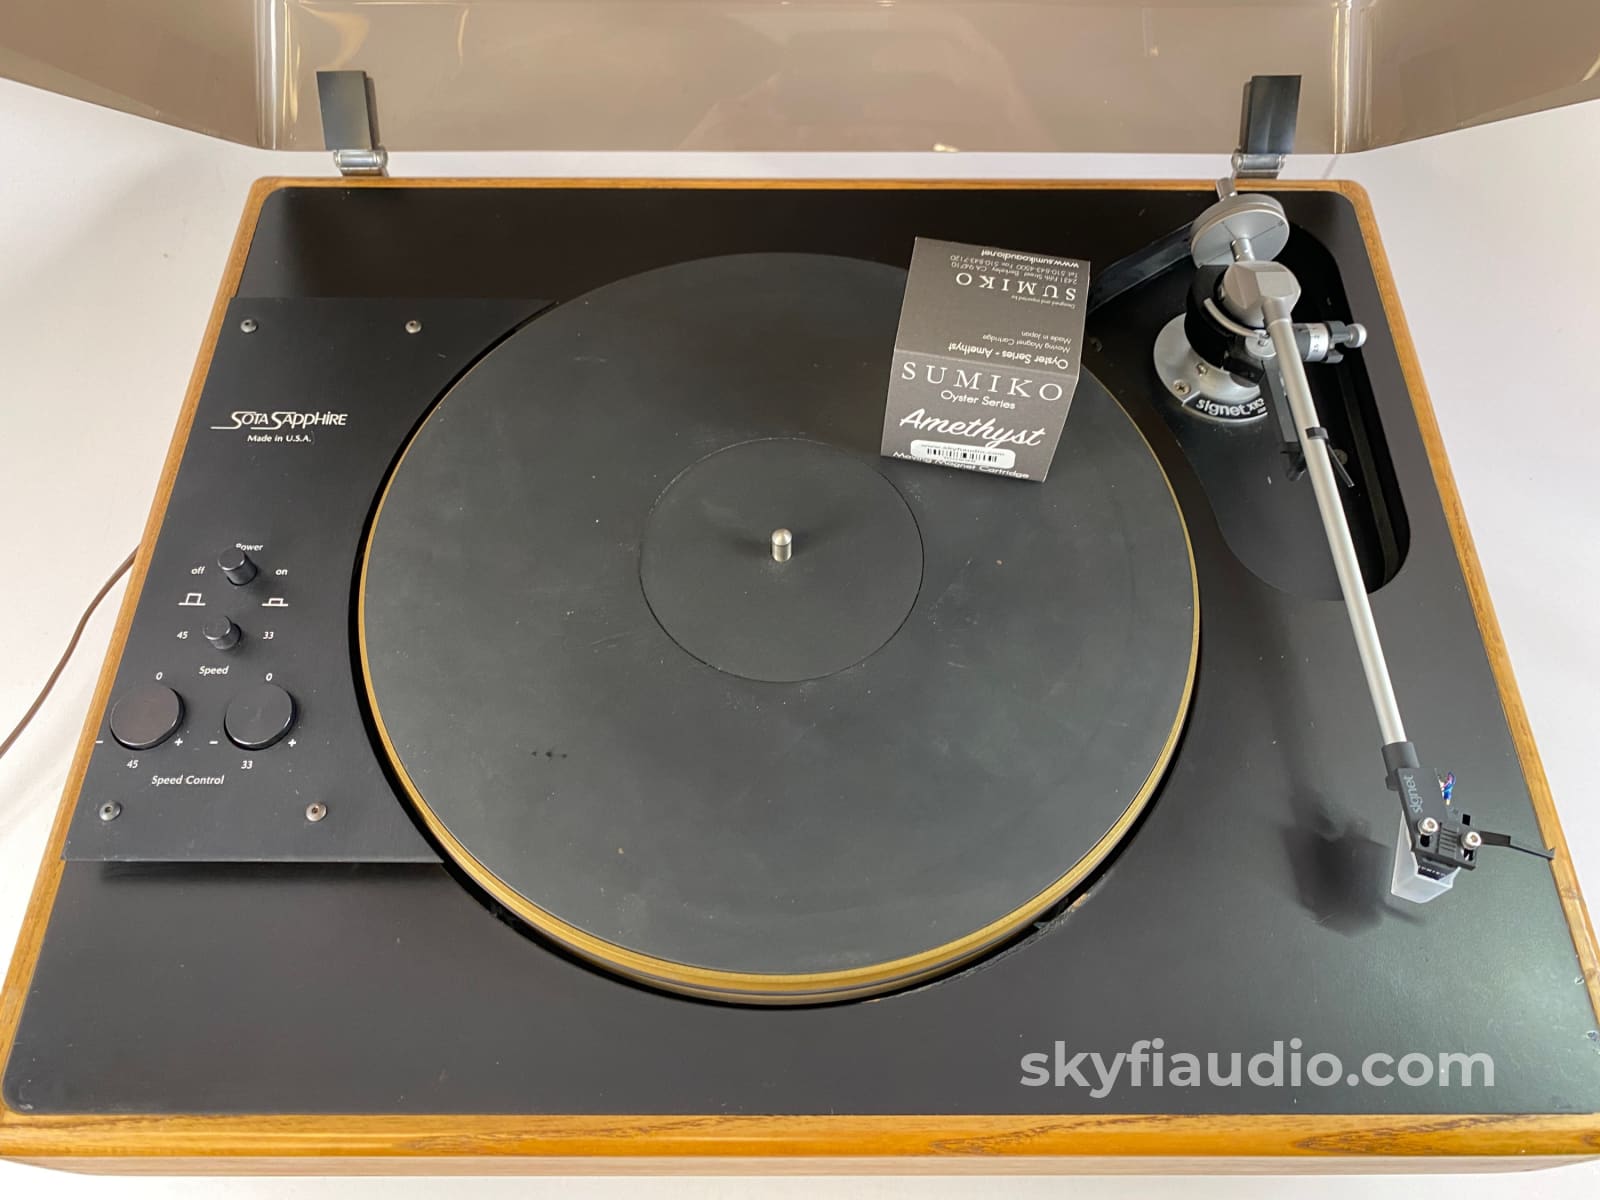 Sota Sapphire Turntable - With A Signet Xk35 Tonearm And New Sumiko Amethyst Cartridge